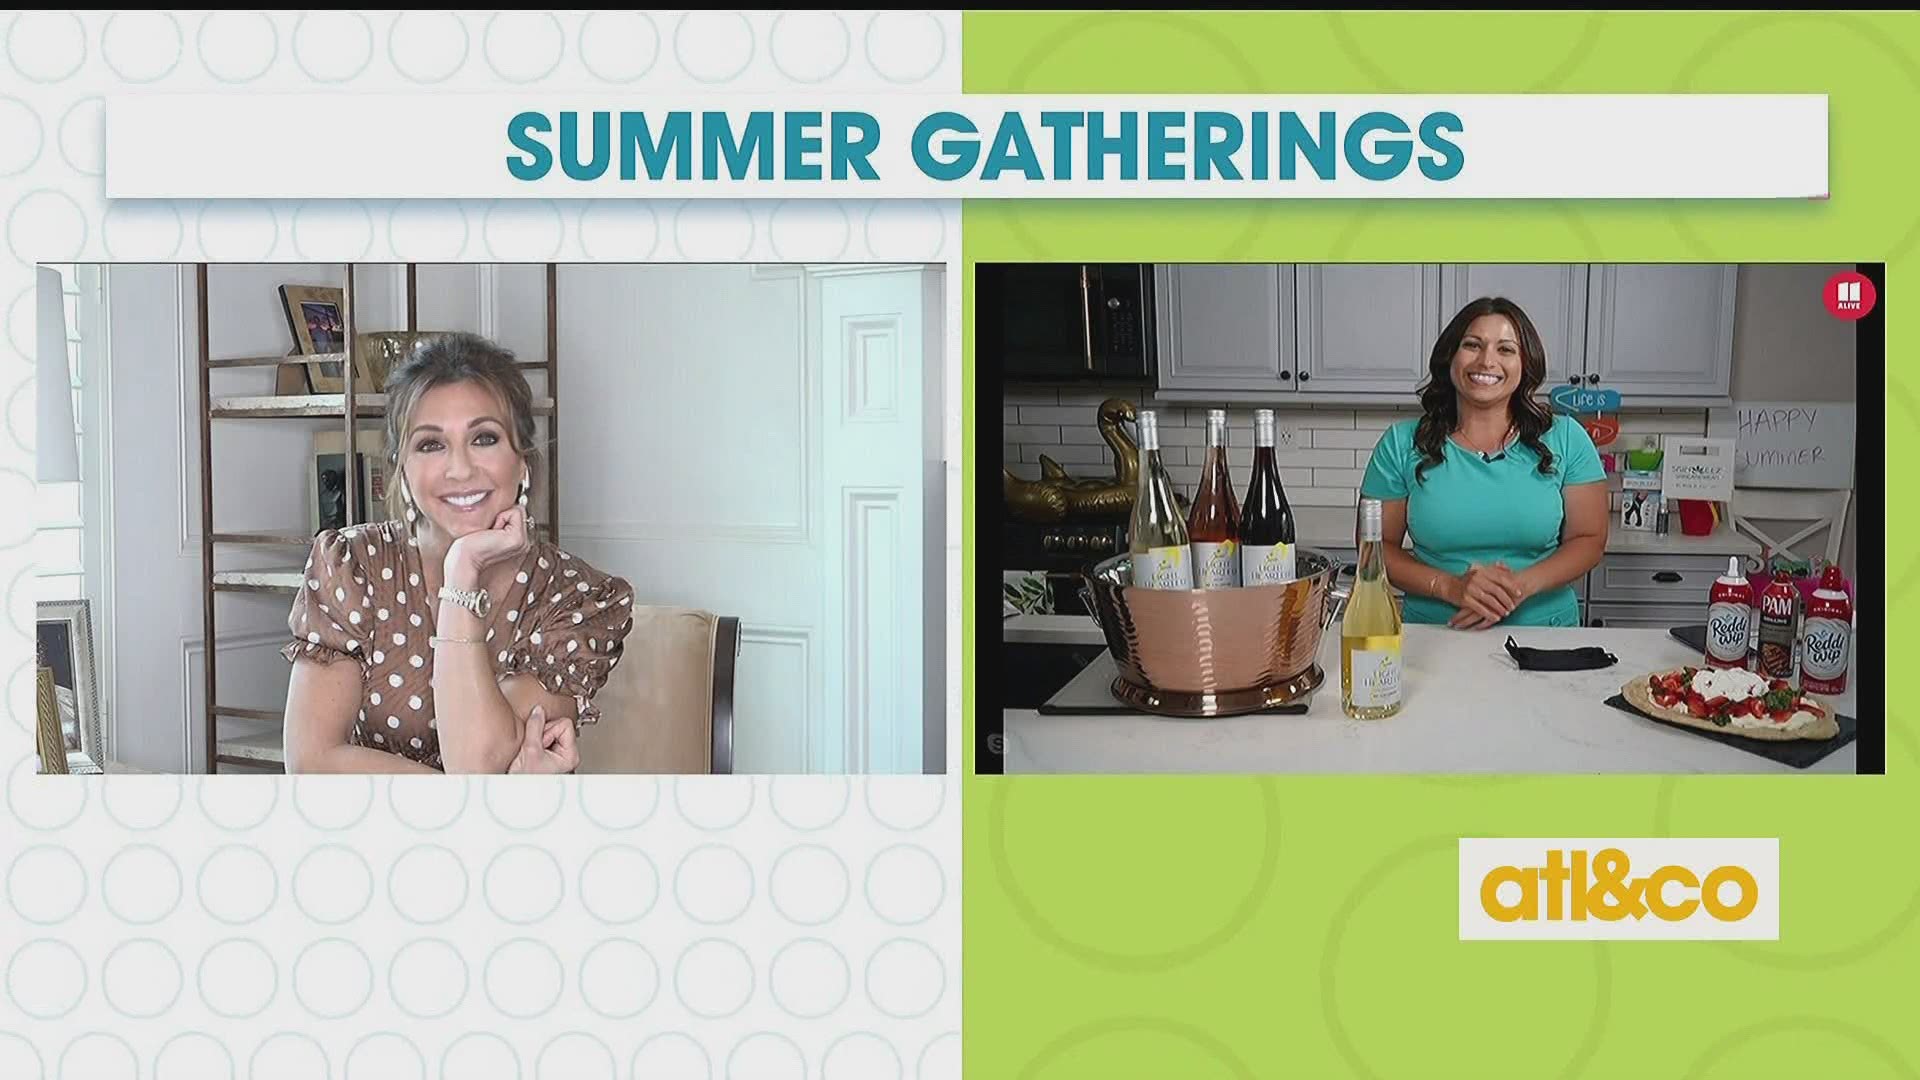 Lifestyle expert Limor Suss shares the ultimate products for your socially-distant summer gatherings!